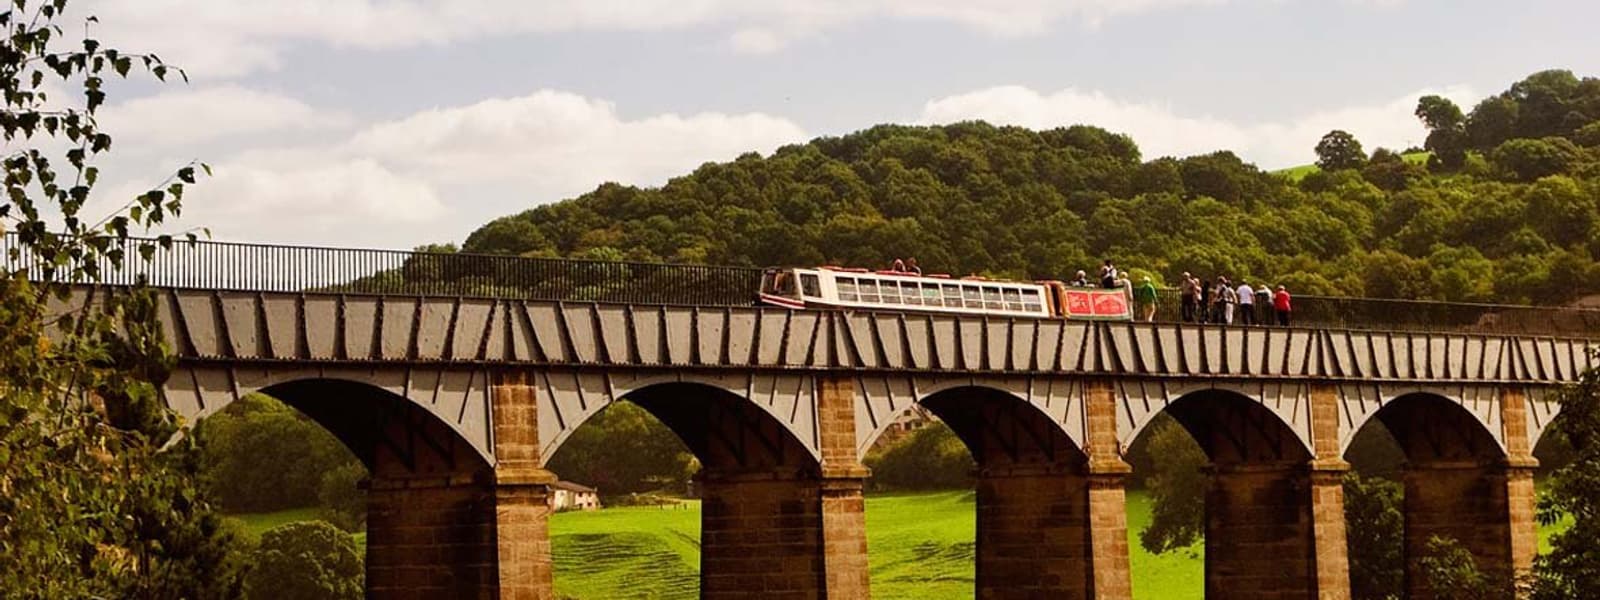 Clwydian Range and Dee Valley NL - Pontcysyllte Aqueduct and Canal World Heritage Site